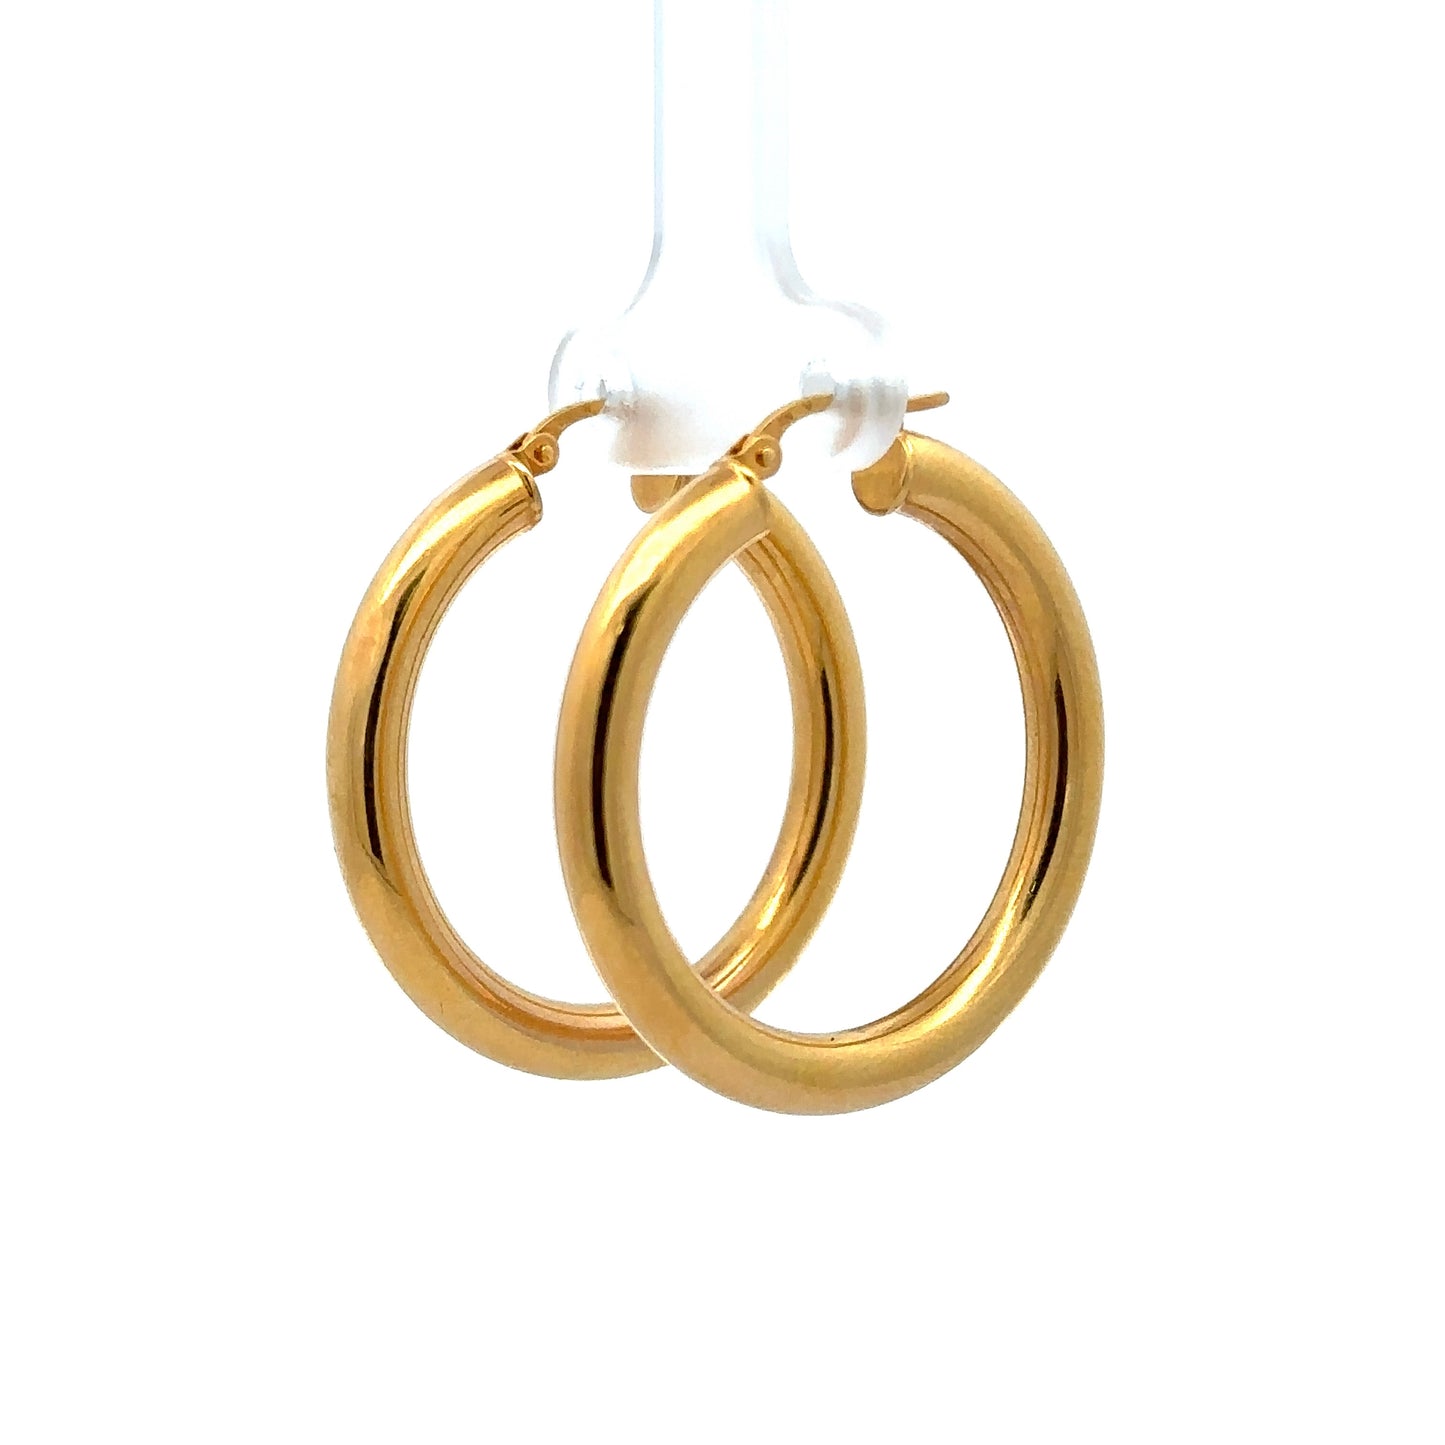 diagonal view of polished yellow gold hoops